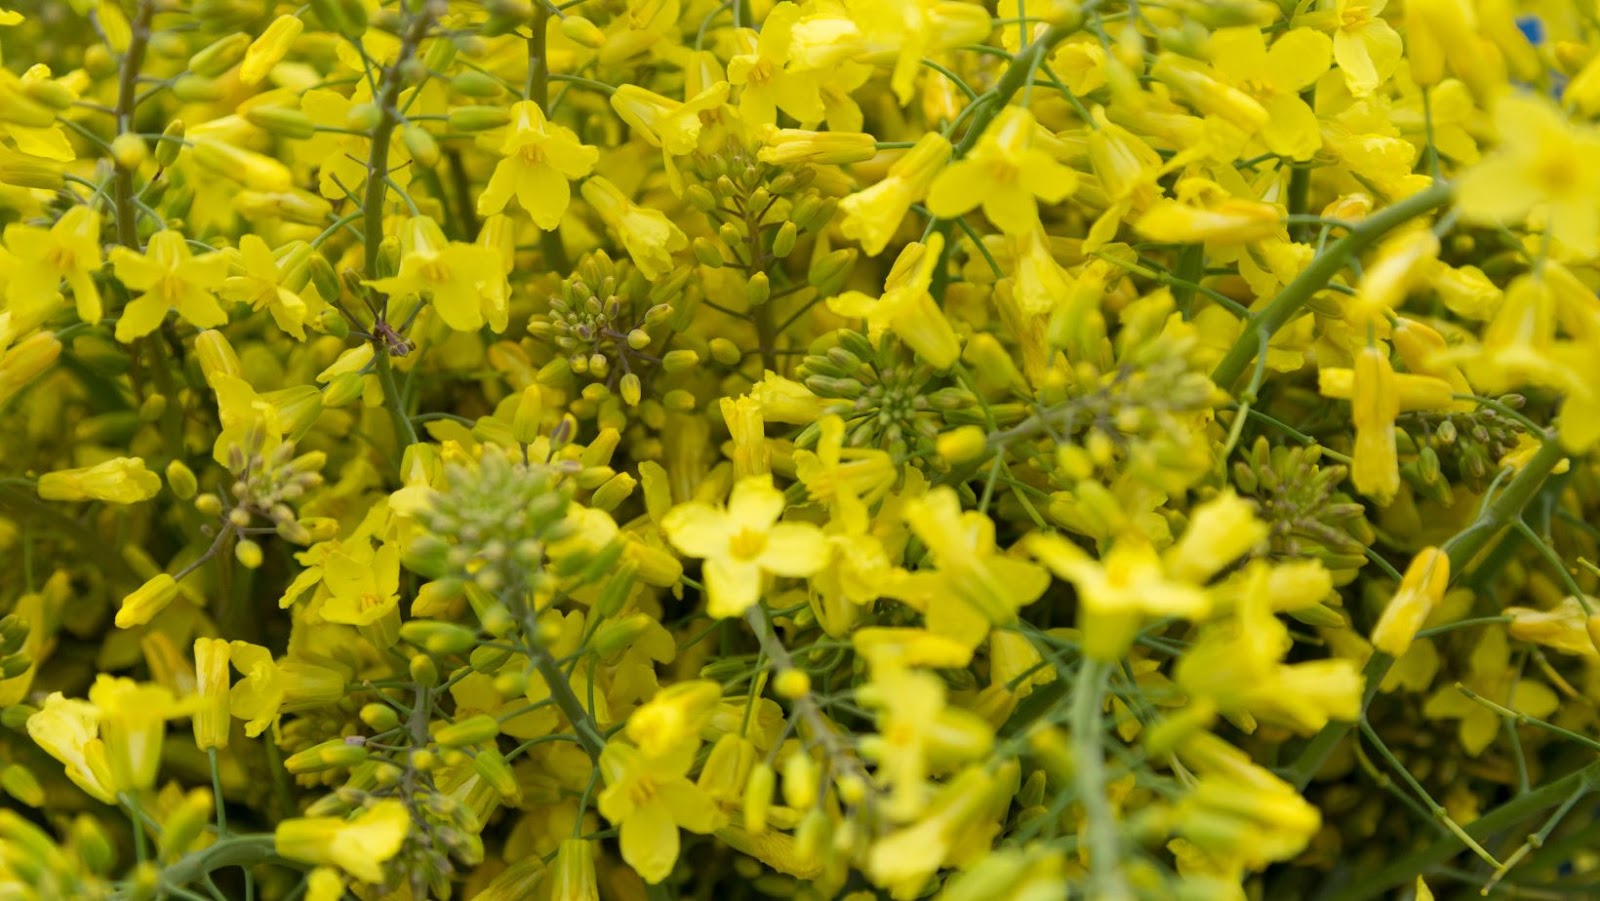 The Potential Risks of Yellow Kale